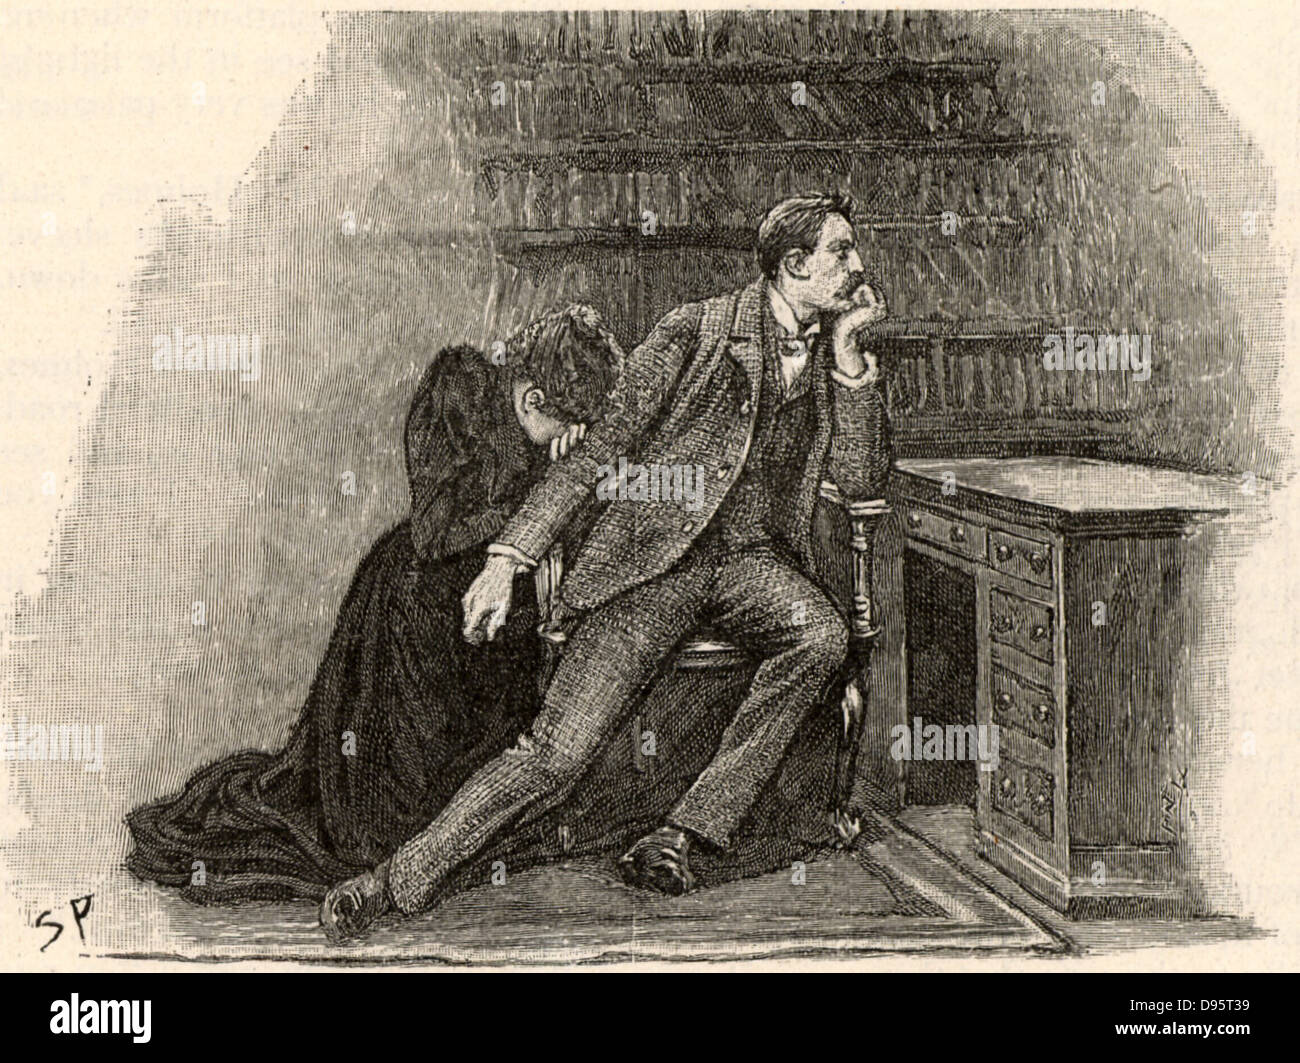 The Adventure of the Yellow Face'. Jack Grant Munro rejecting his wife because she will not disclose the secret behind her suspicious behaviour.  From 'The Adventures of Sherlock Holmes' by Conan Doyle from 'The Strand Magazine' (London, 1893). Illustration by Sidney E Paget, the first artist to draw Sherlock Holmes.  Engraving. Stock Photo